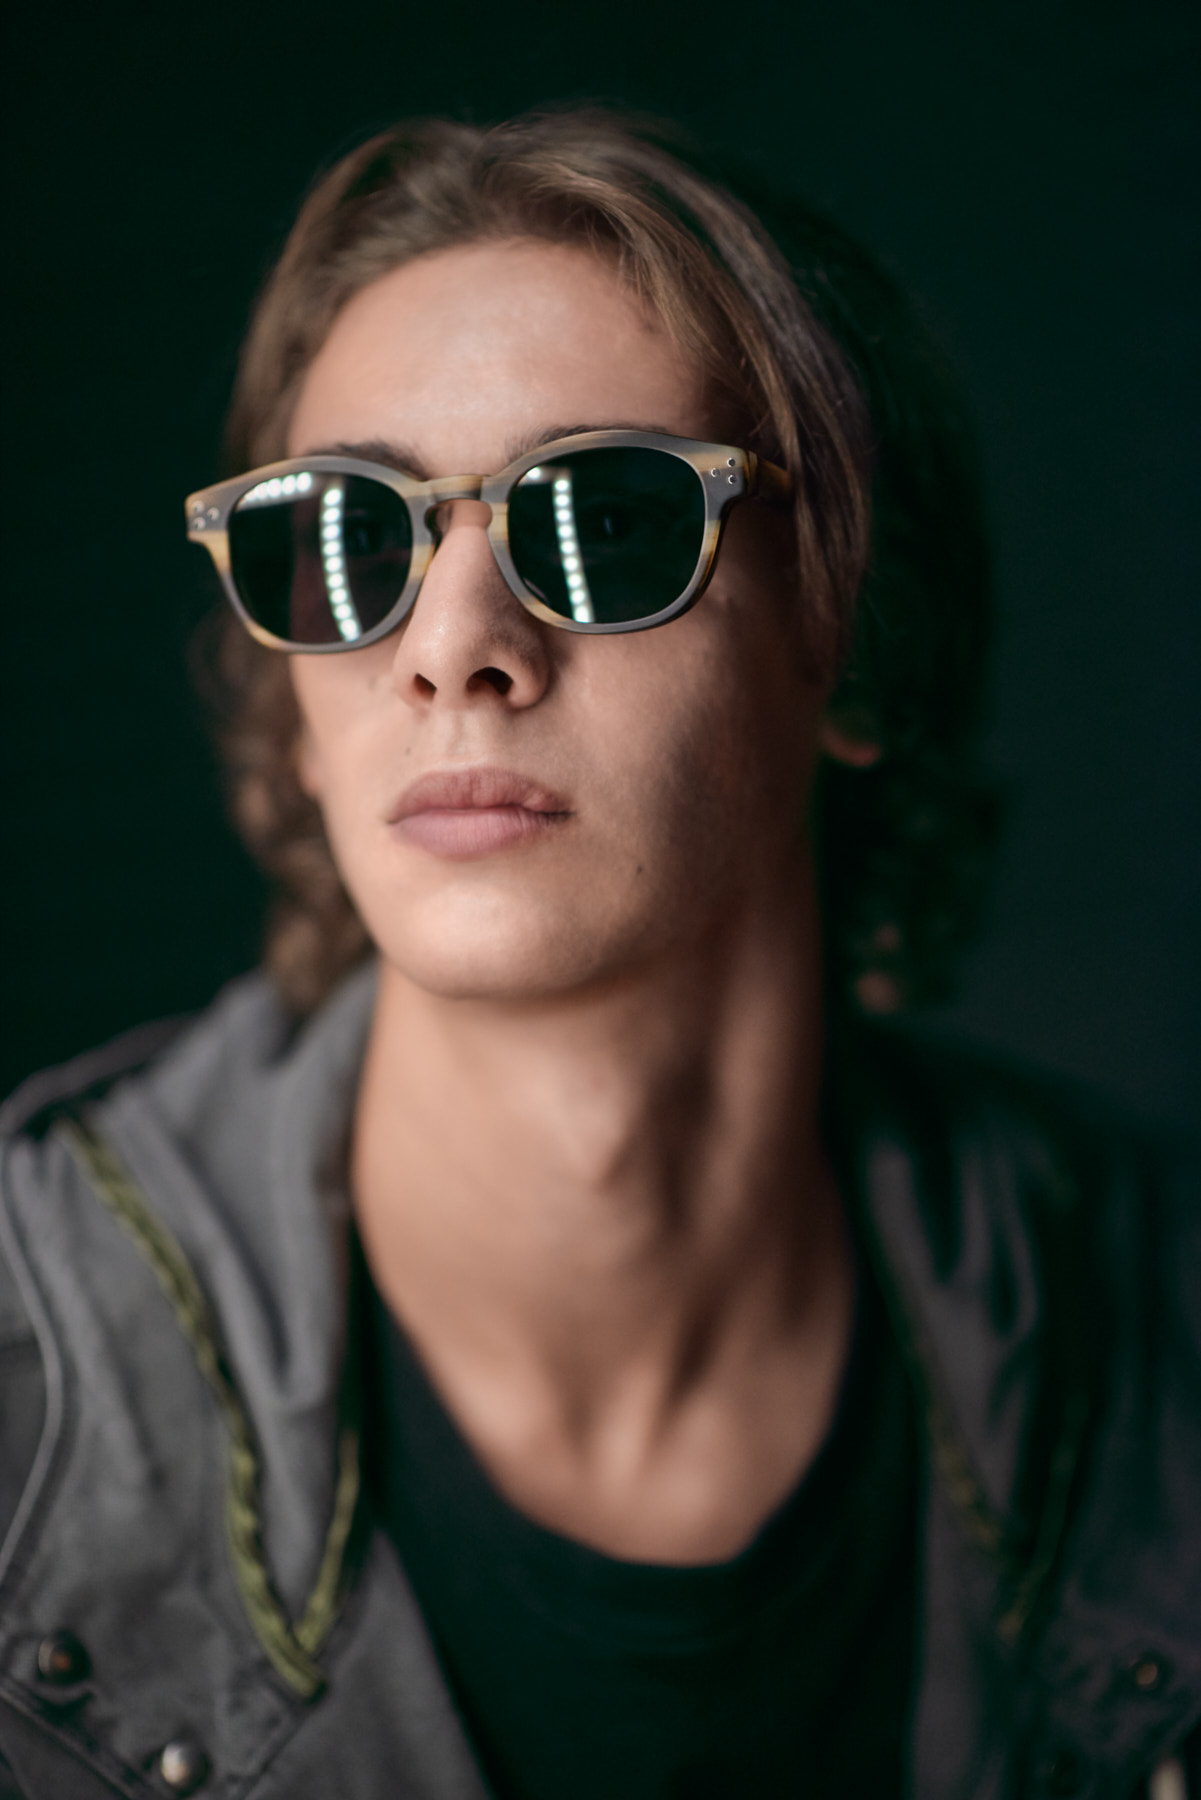 male model wearing sunglasses on a dark background with led lighting reflected on the lenses